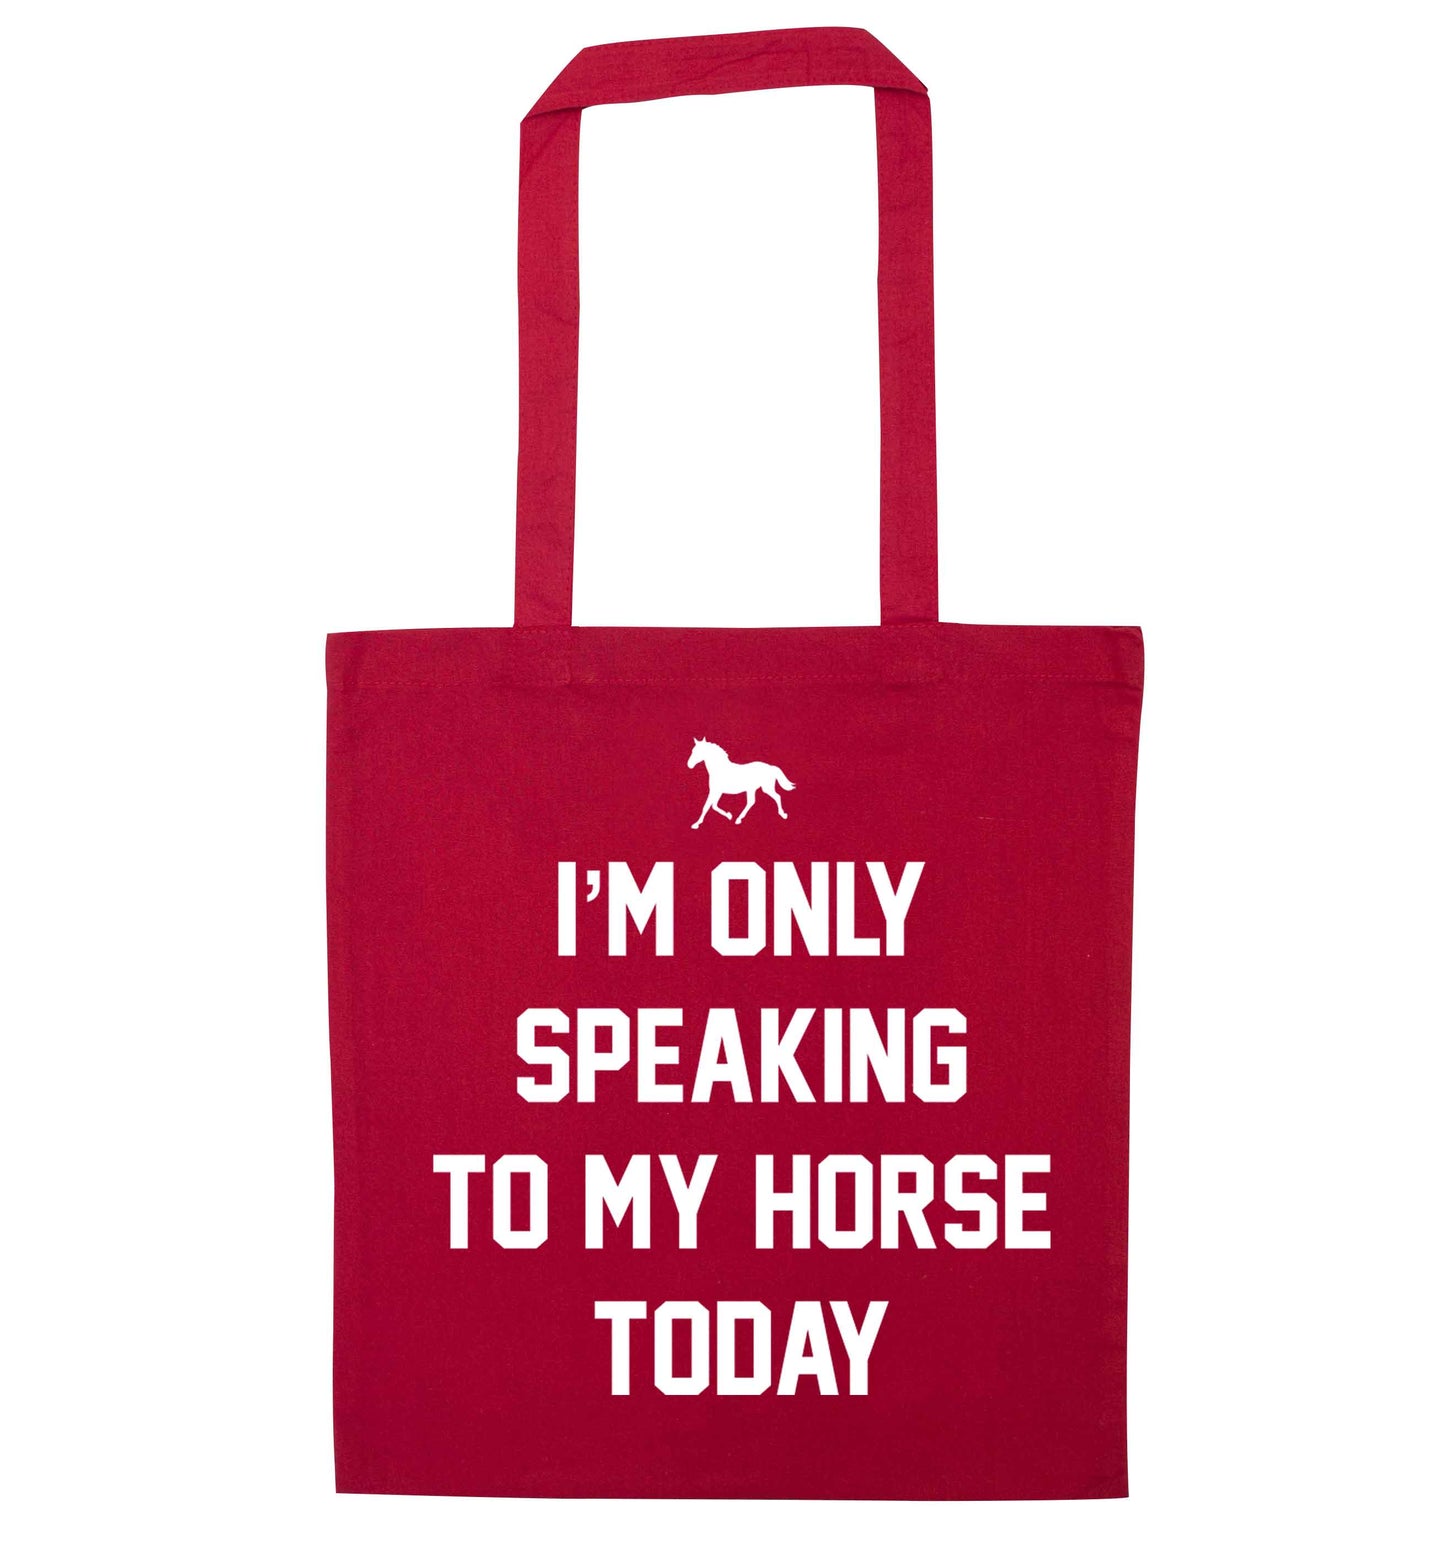 I'm only speaking to my horse today red tote bag